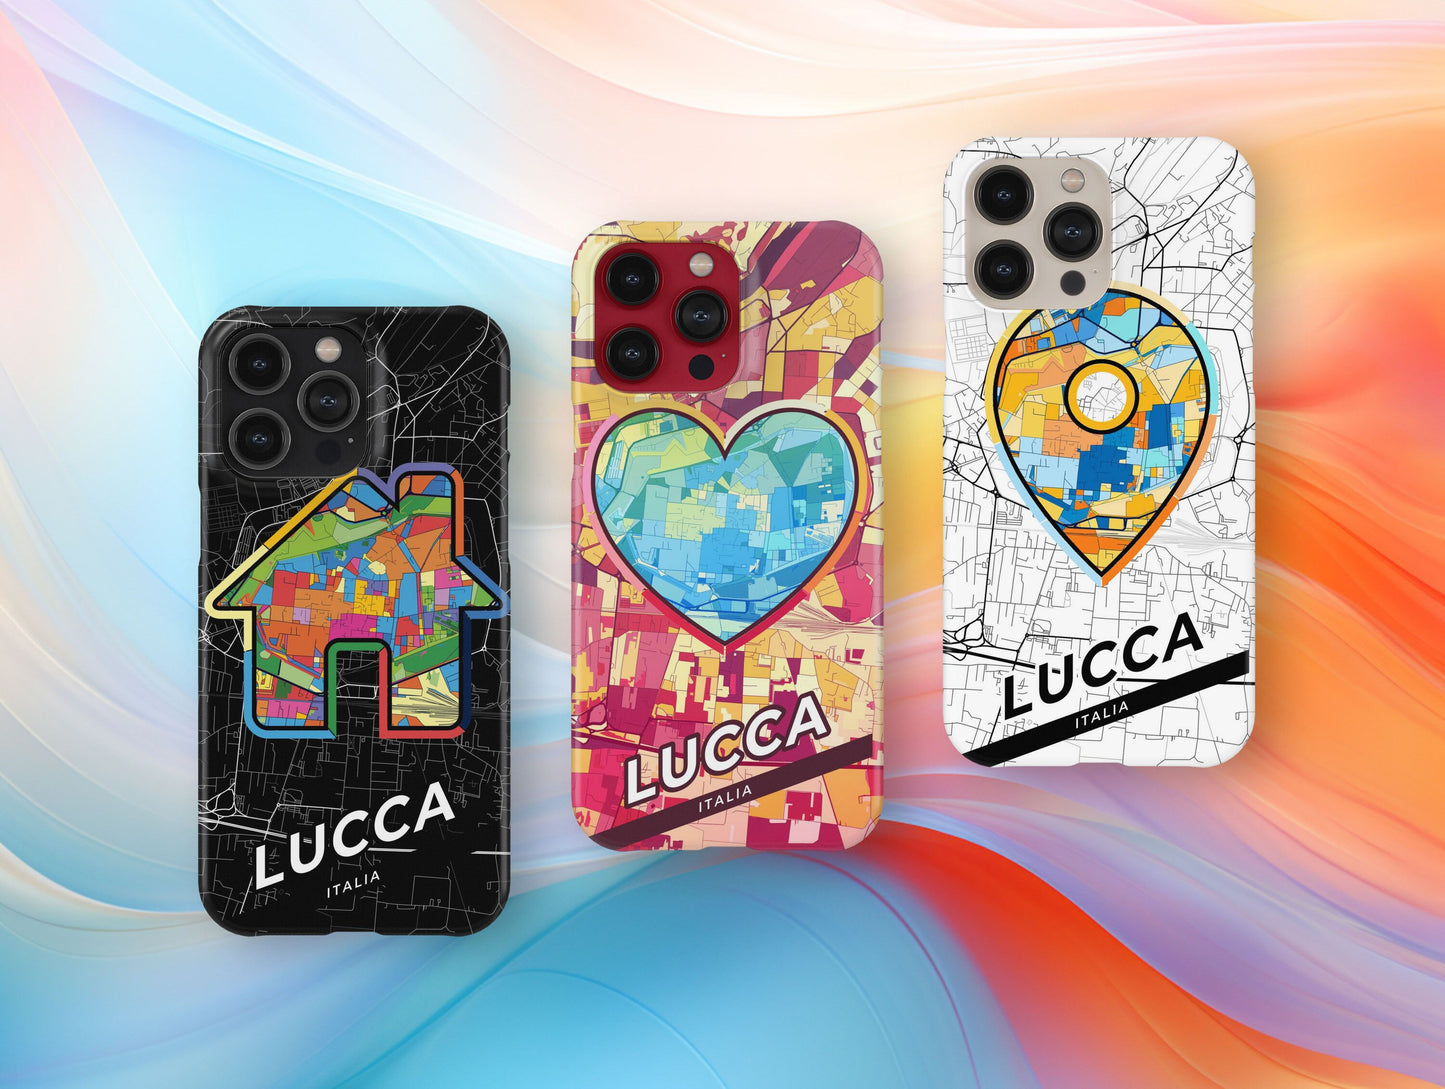 Lucca Italy slim phone case with colorful icon. Birthday, wedding or housewarming gift. Couple match cases.